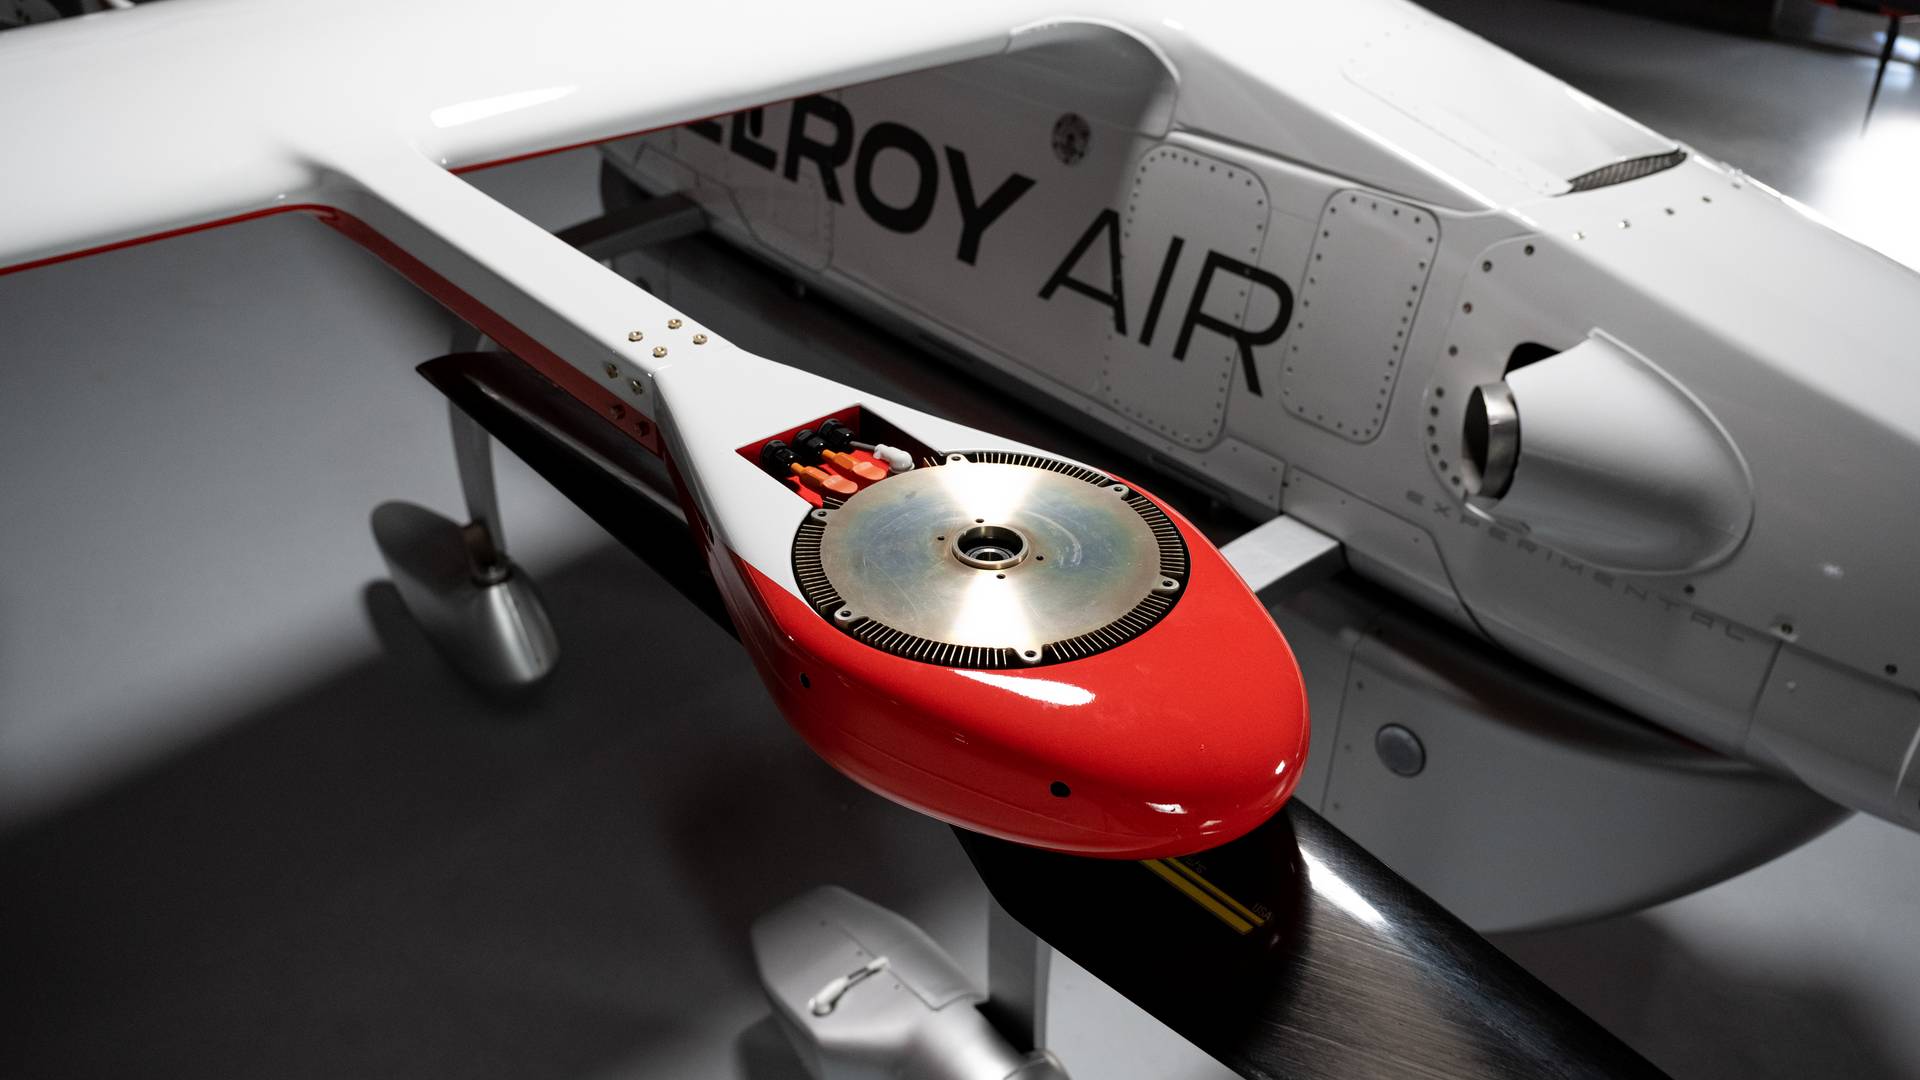 Could Cargo Drones Pave The Way For Passenger eVTOLs?